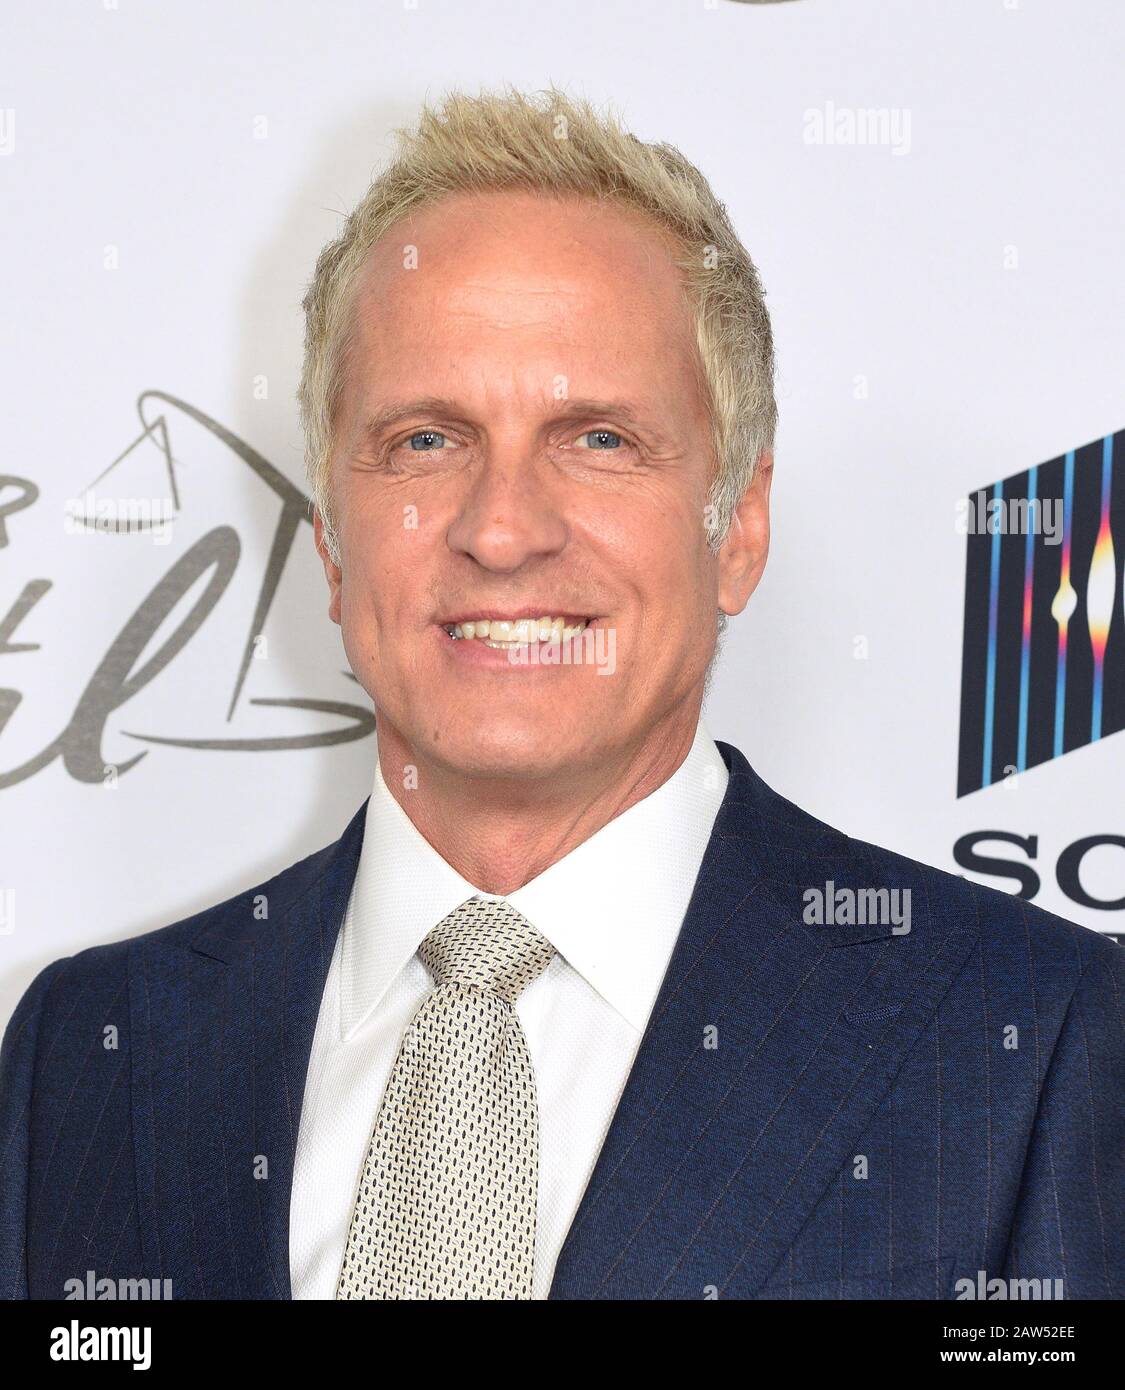 HOLLYWOOD, CALIFORNIA - FEBRUARY 05: Patrick Fabian attends the premiere of AMC's 'Better Call Saul' Season 5 at ArcLight Cinemas on February 05, 2020 in Hollywood, California. Photo: Annie Lesser/imageSPACE/MediaPunch Stock Photo